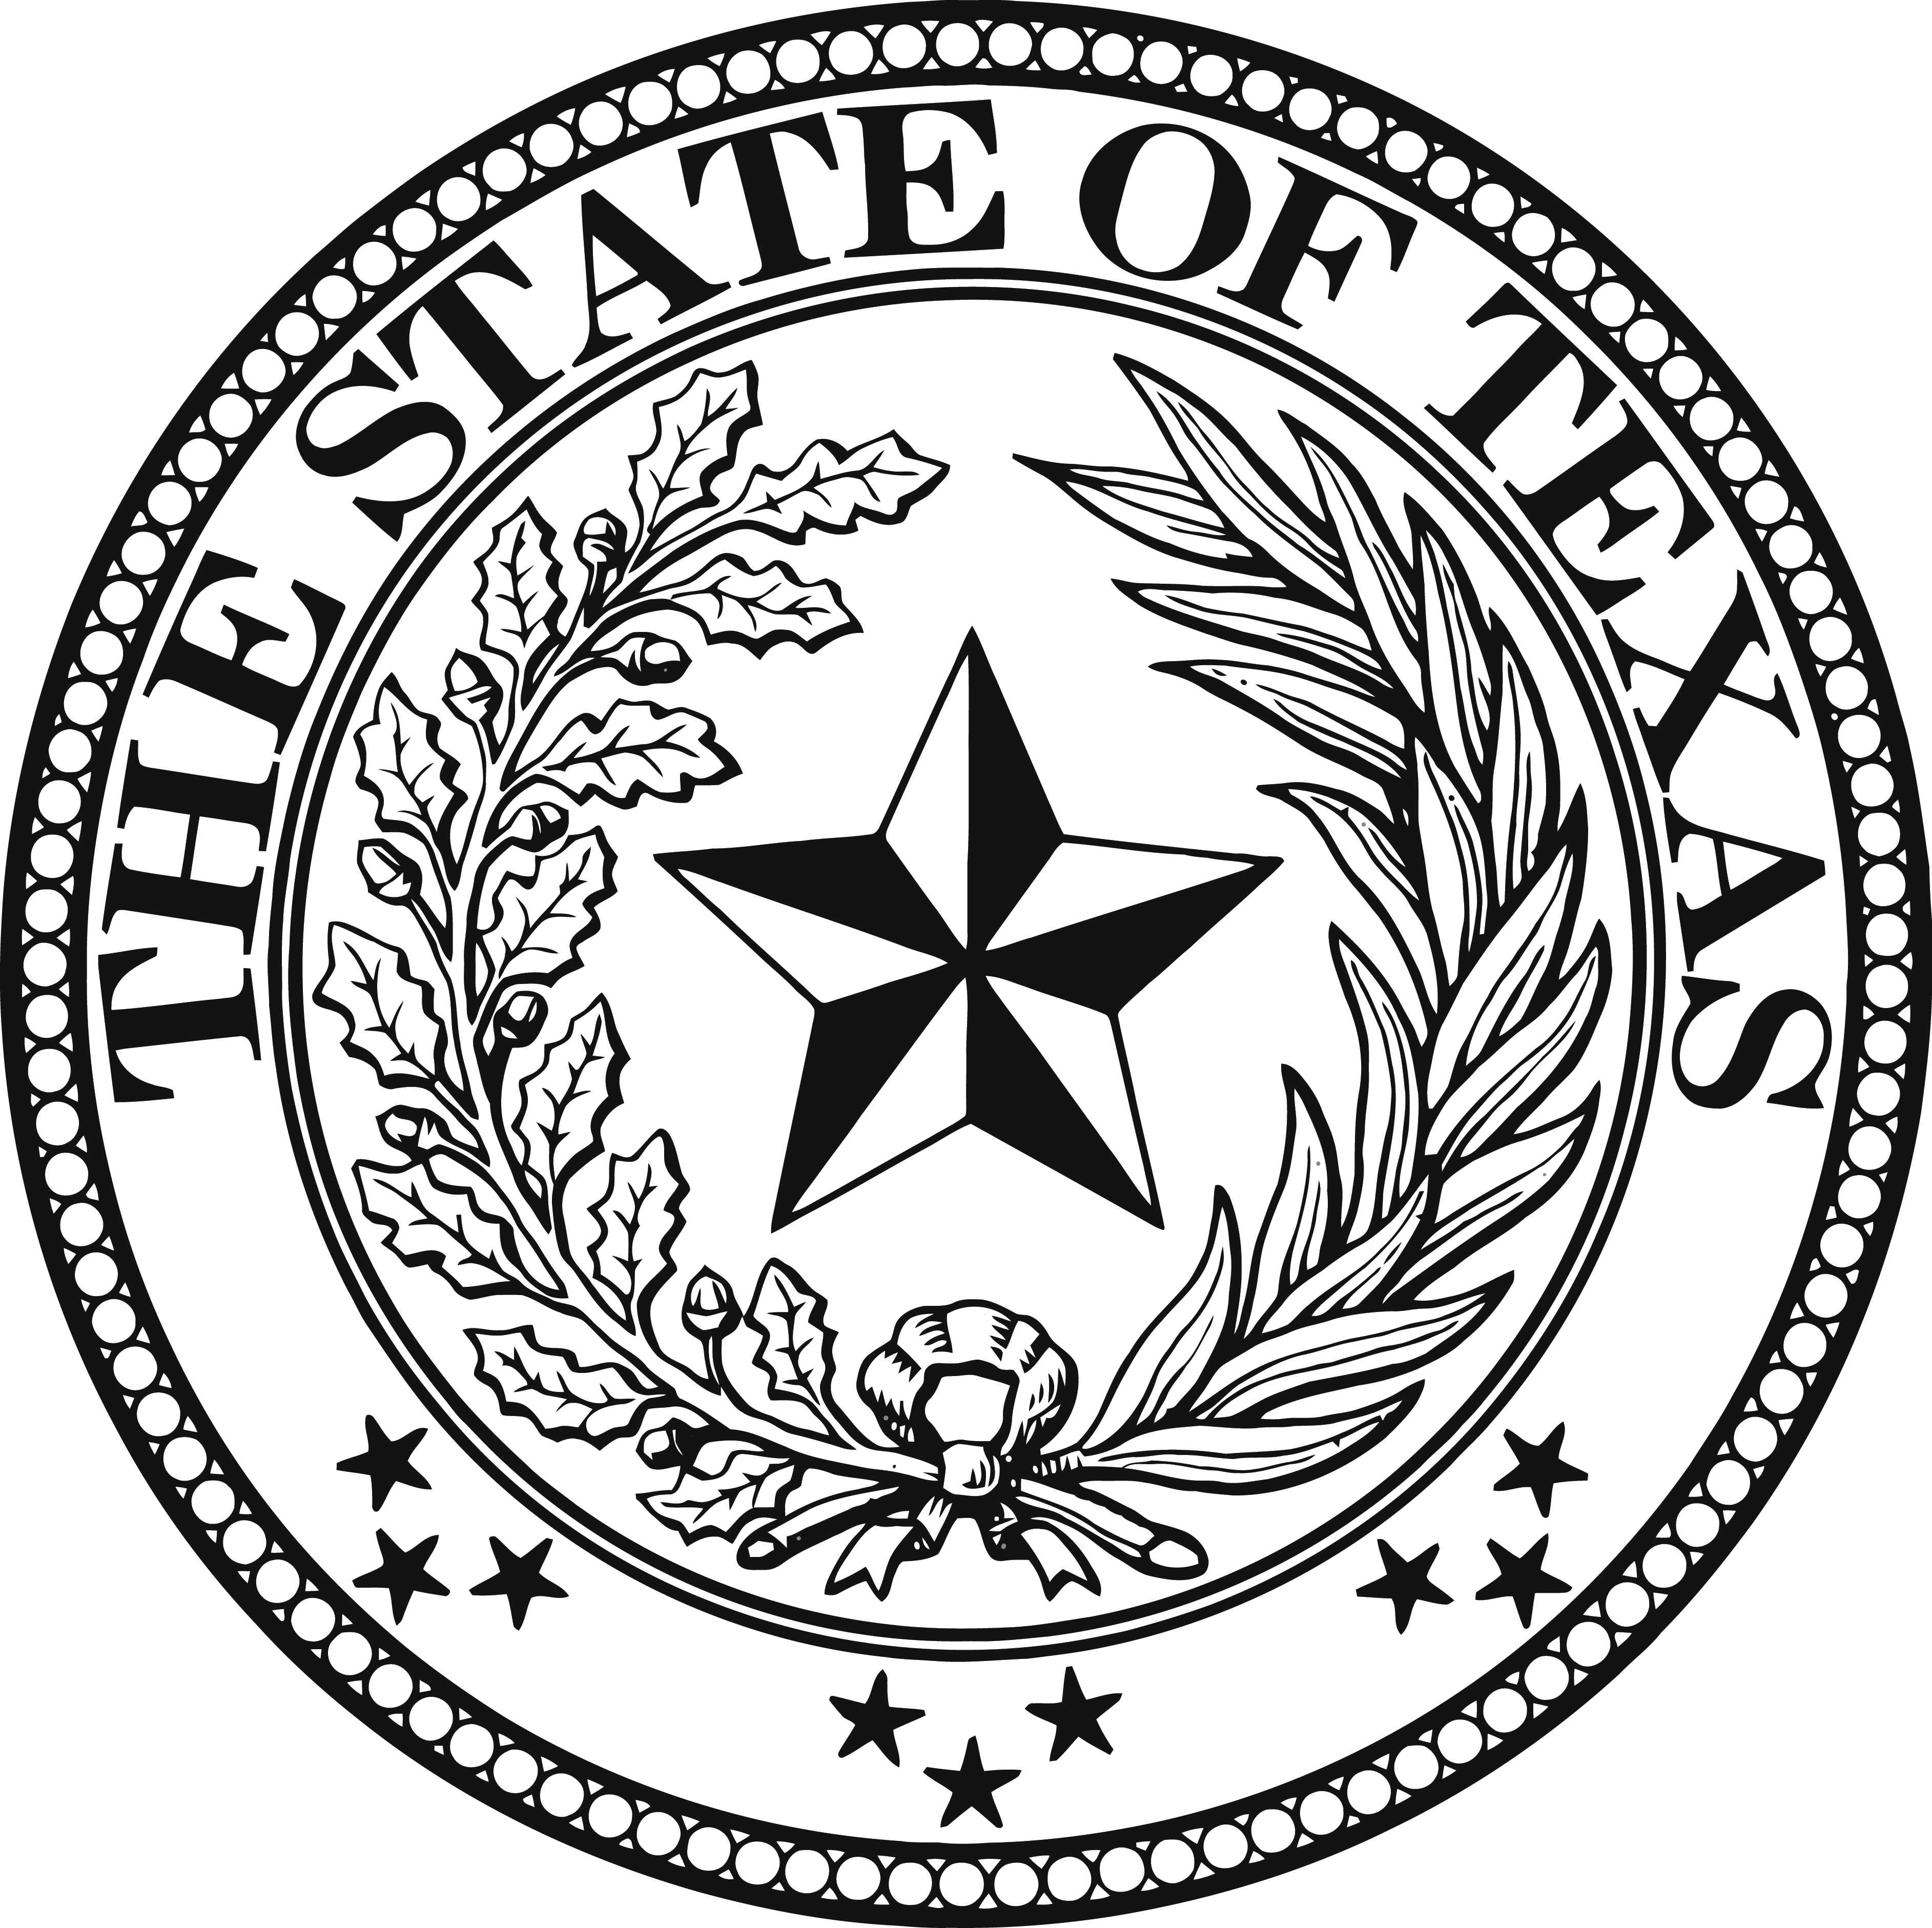 Texas State Seal by on DeviantArt